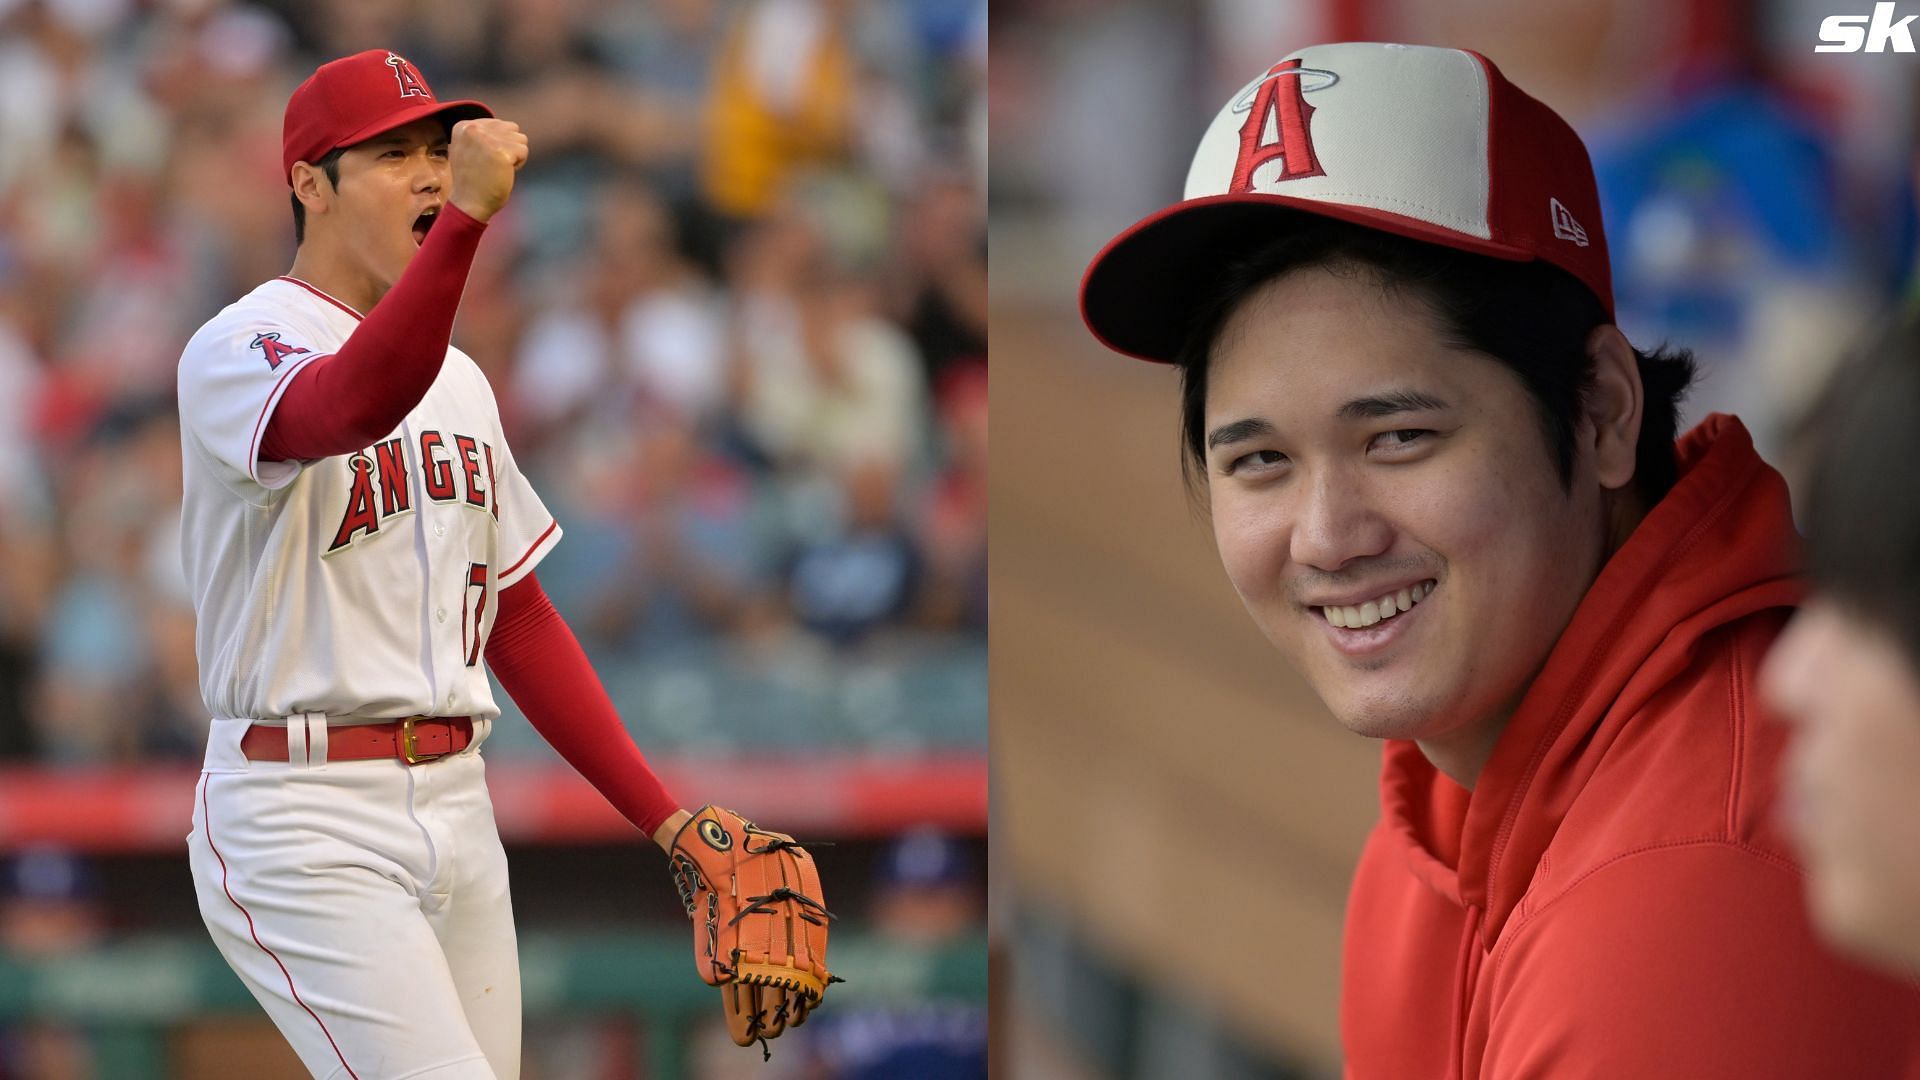 Shohei Ohtani of the Los Angeles Angels in the dugout while playing the Detroit Tigers